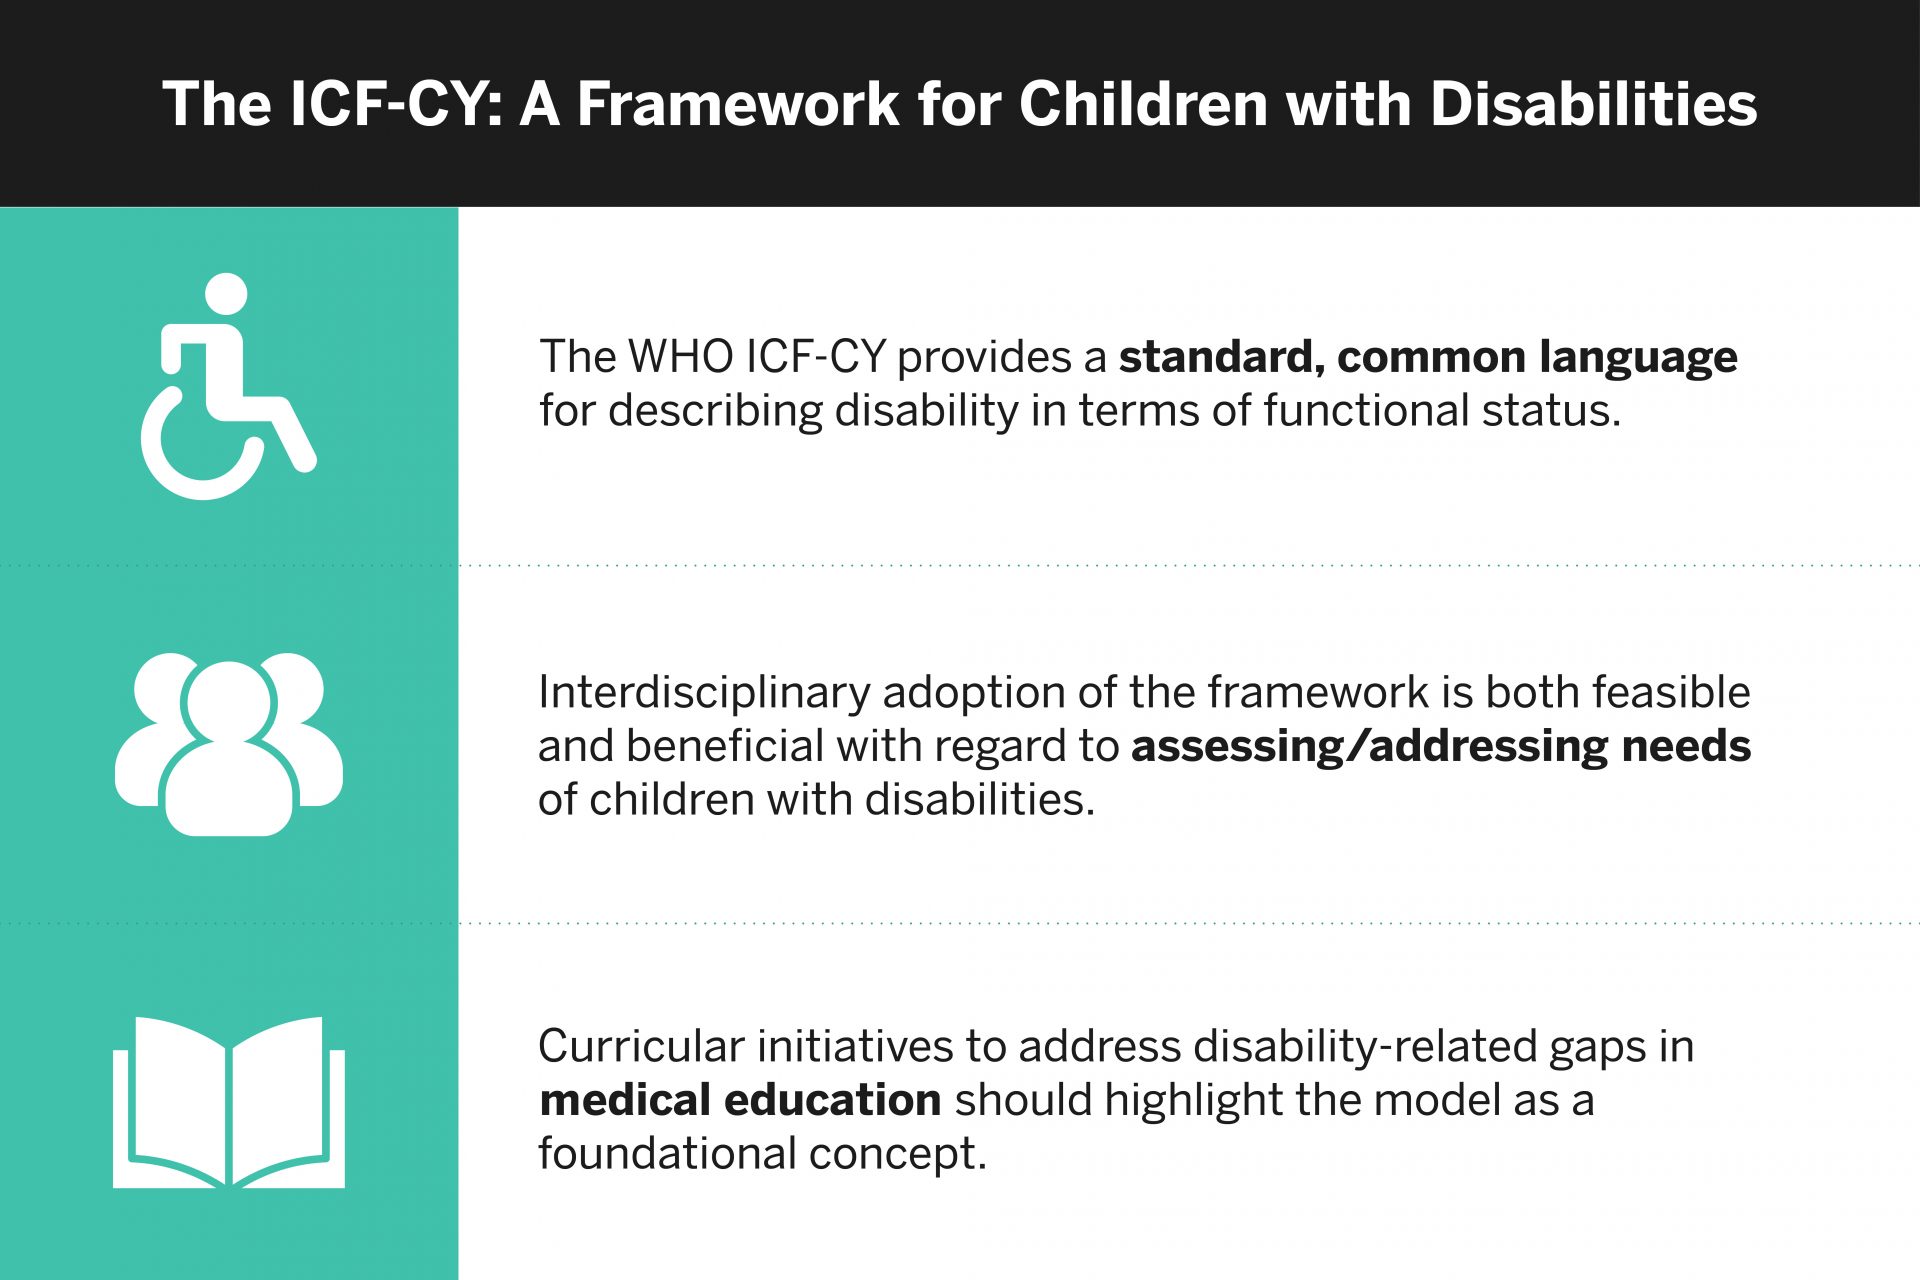 The ICF-CY: A Framework for Children with Disabilities